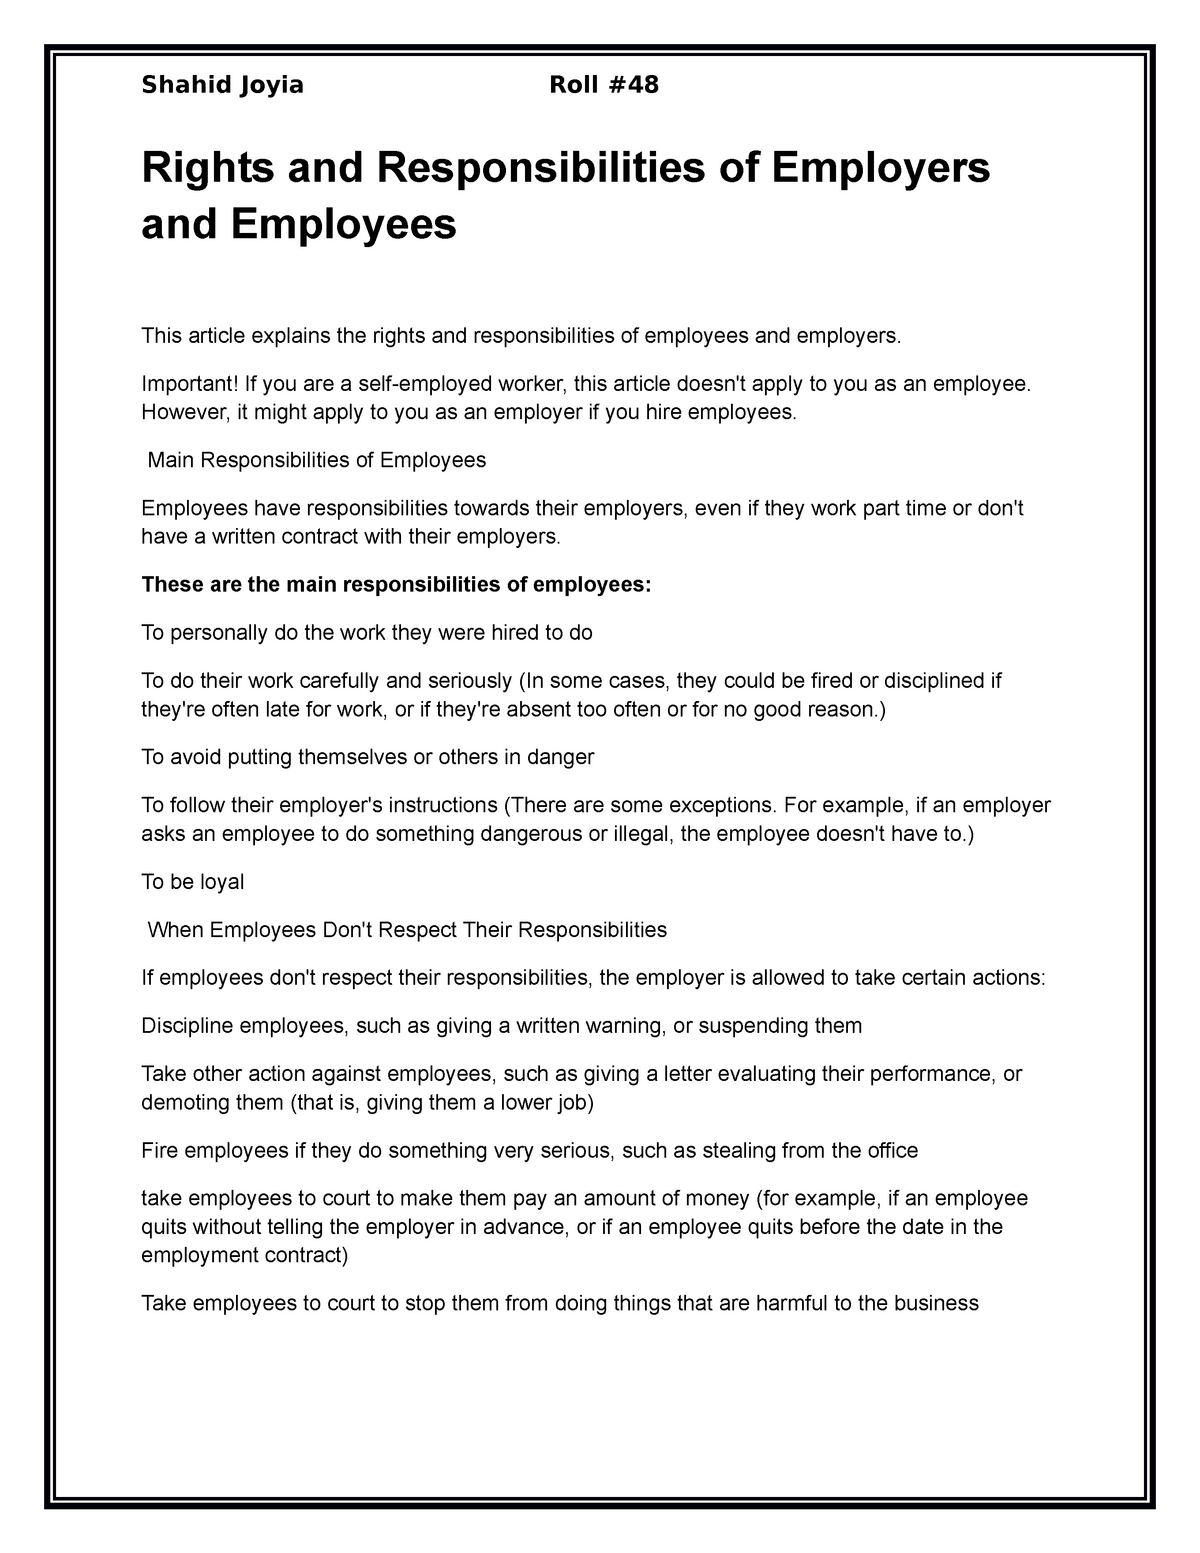 case study employee rights and responsibilities